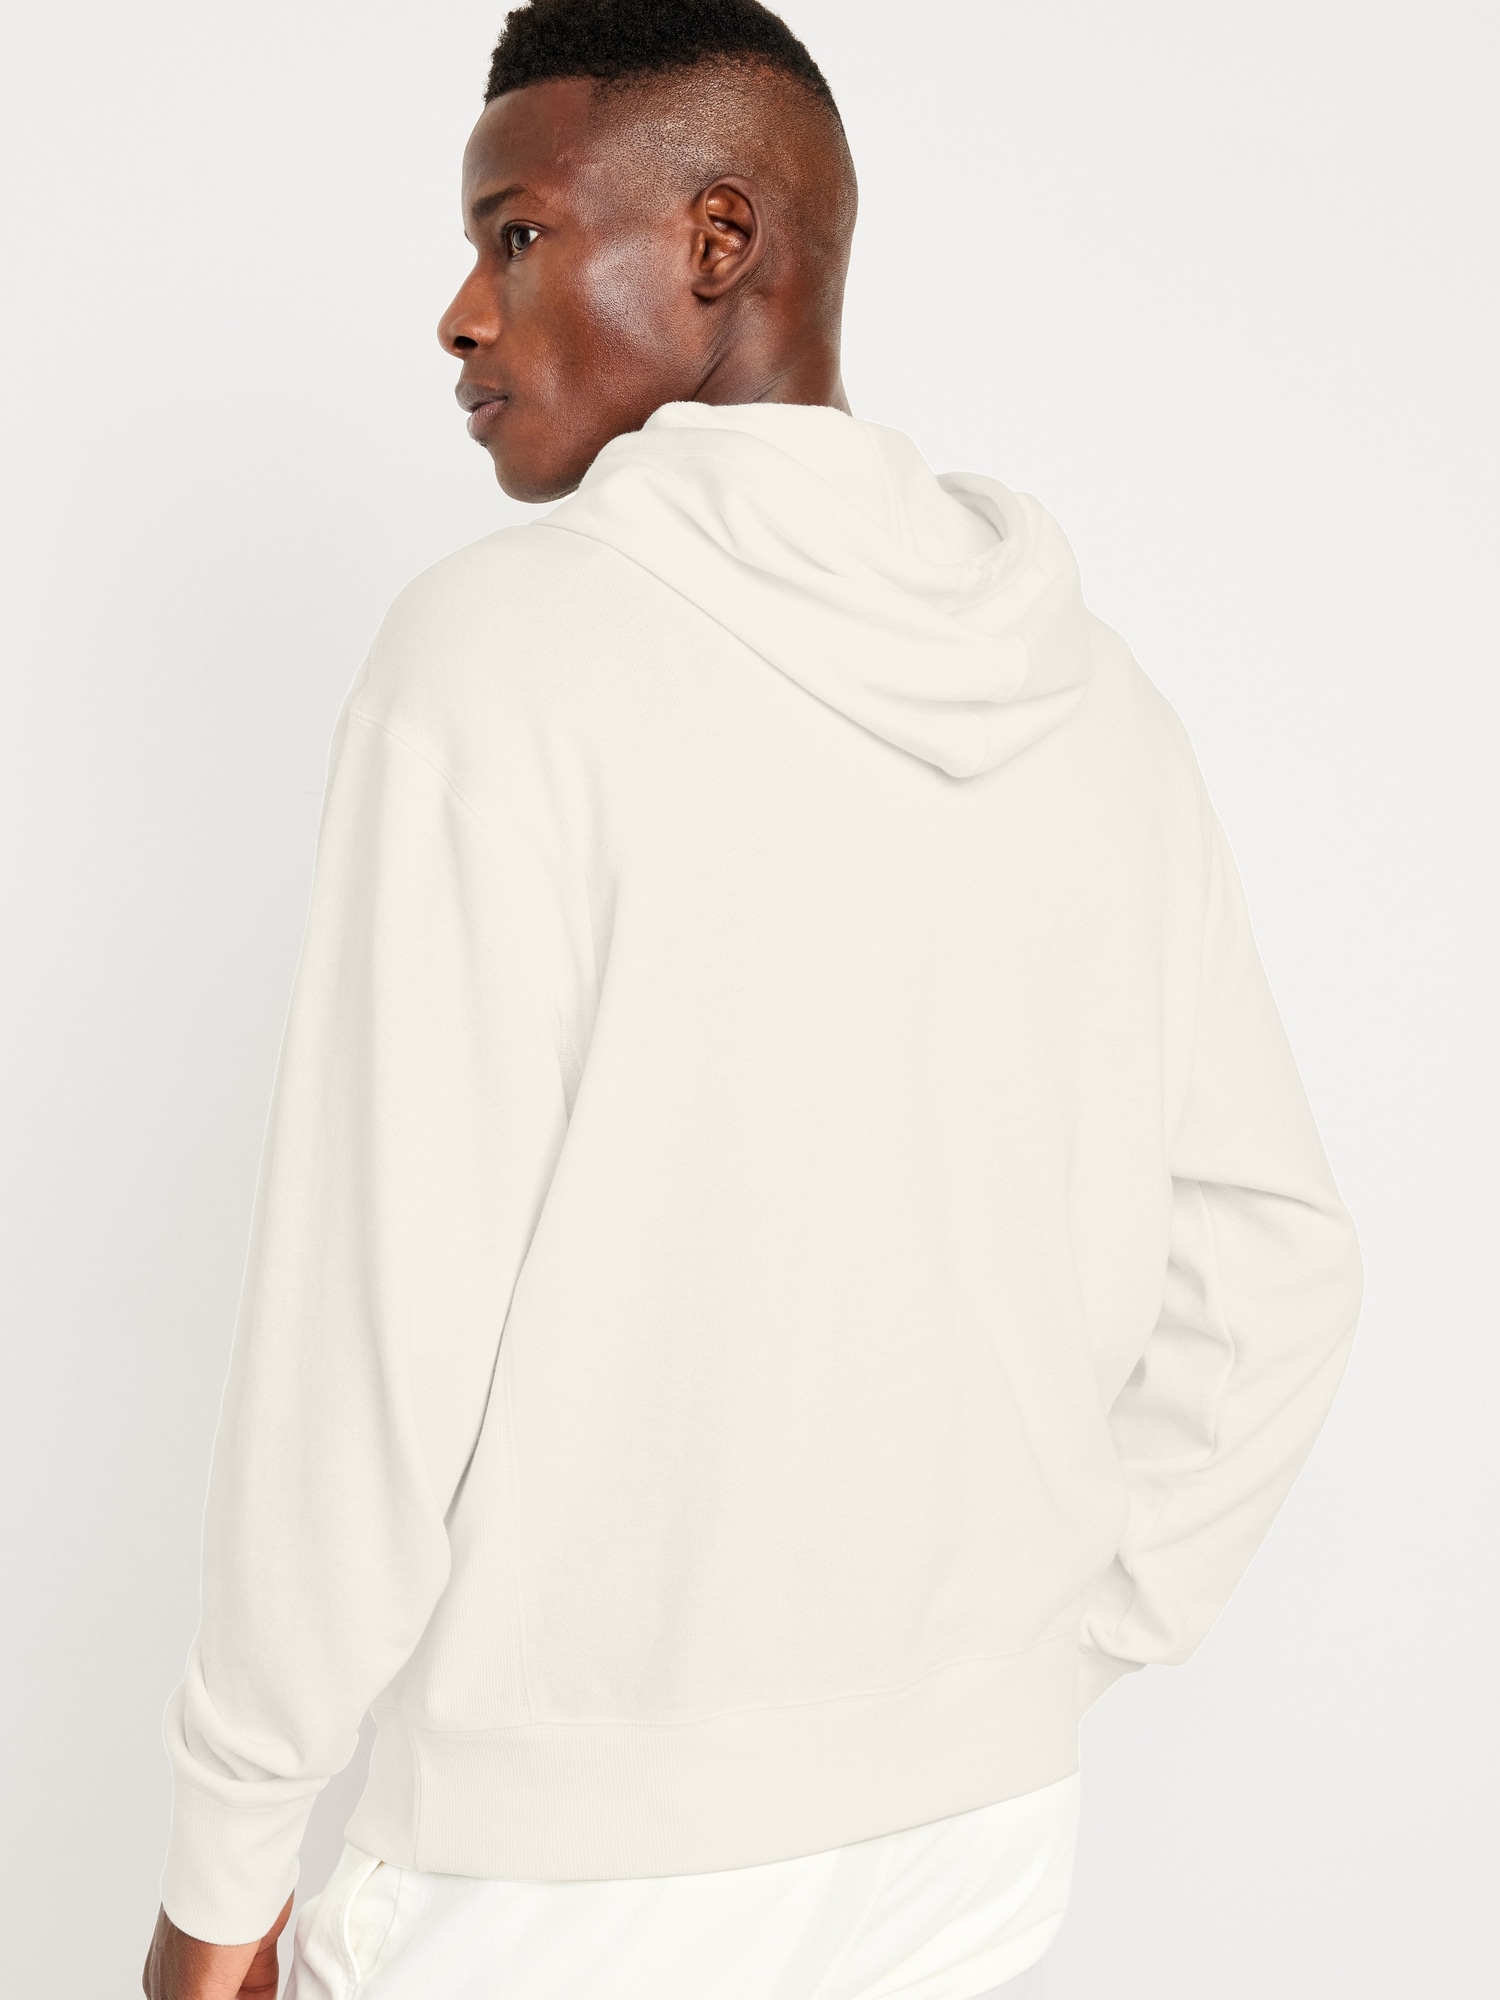 The Saggy Boobs Lightweight Hoodie for Sale by anotherskin